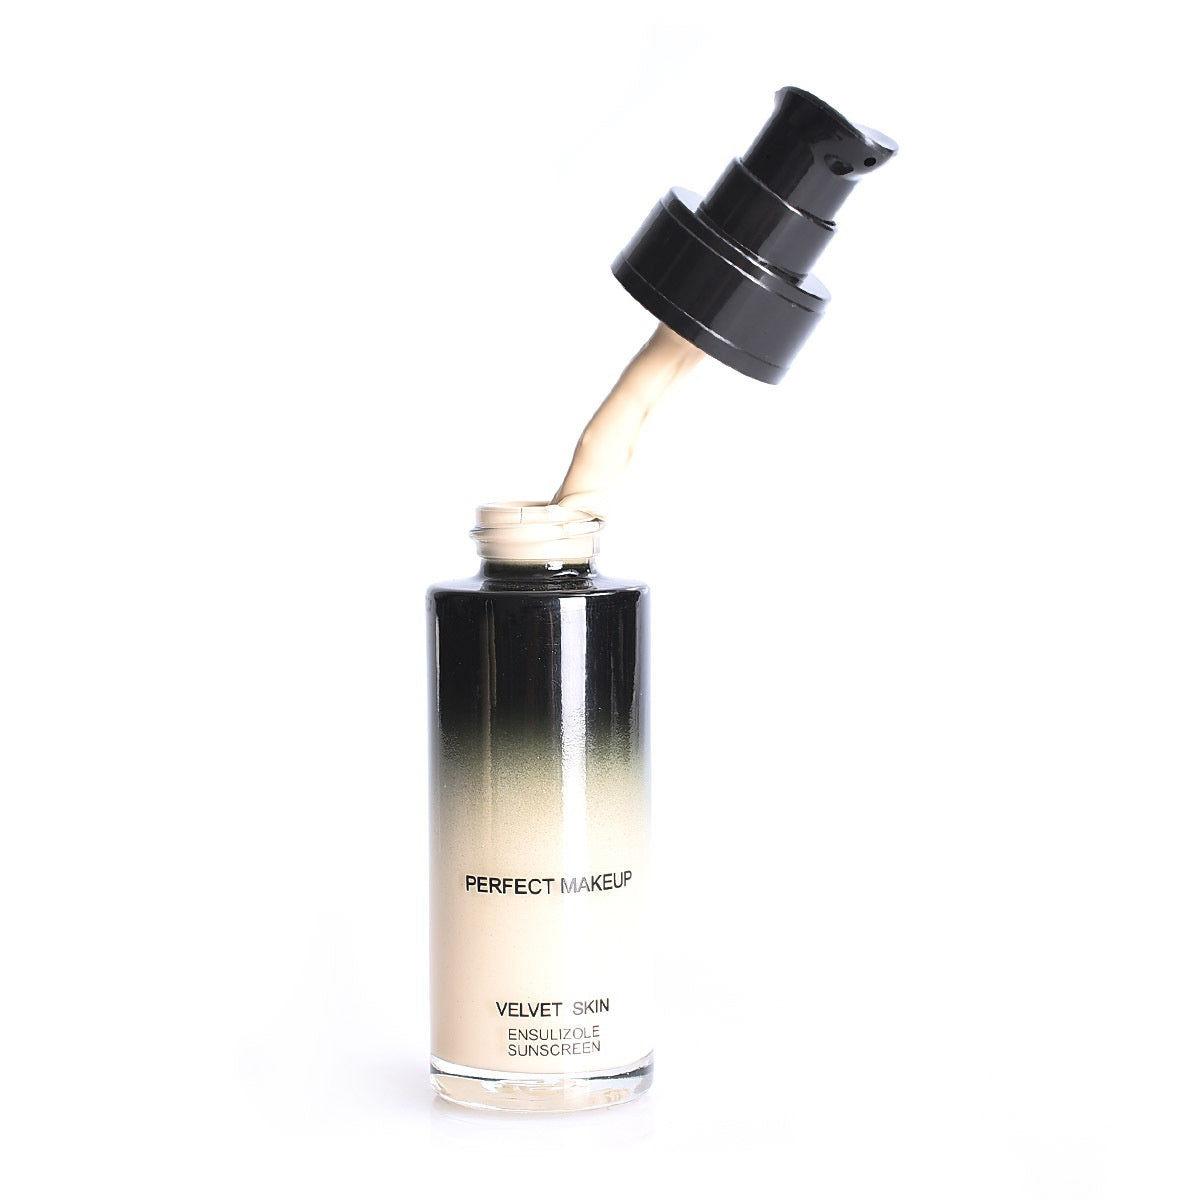 glow liquid foundation with pump nozzle with conduit